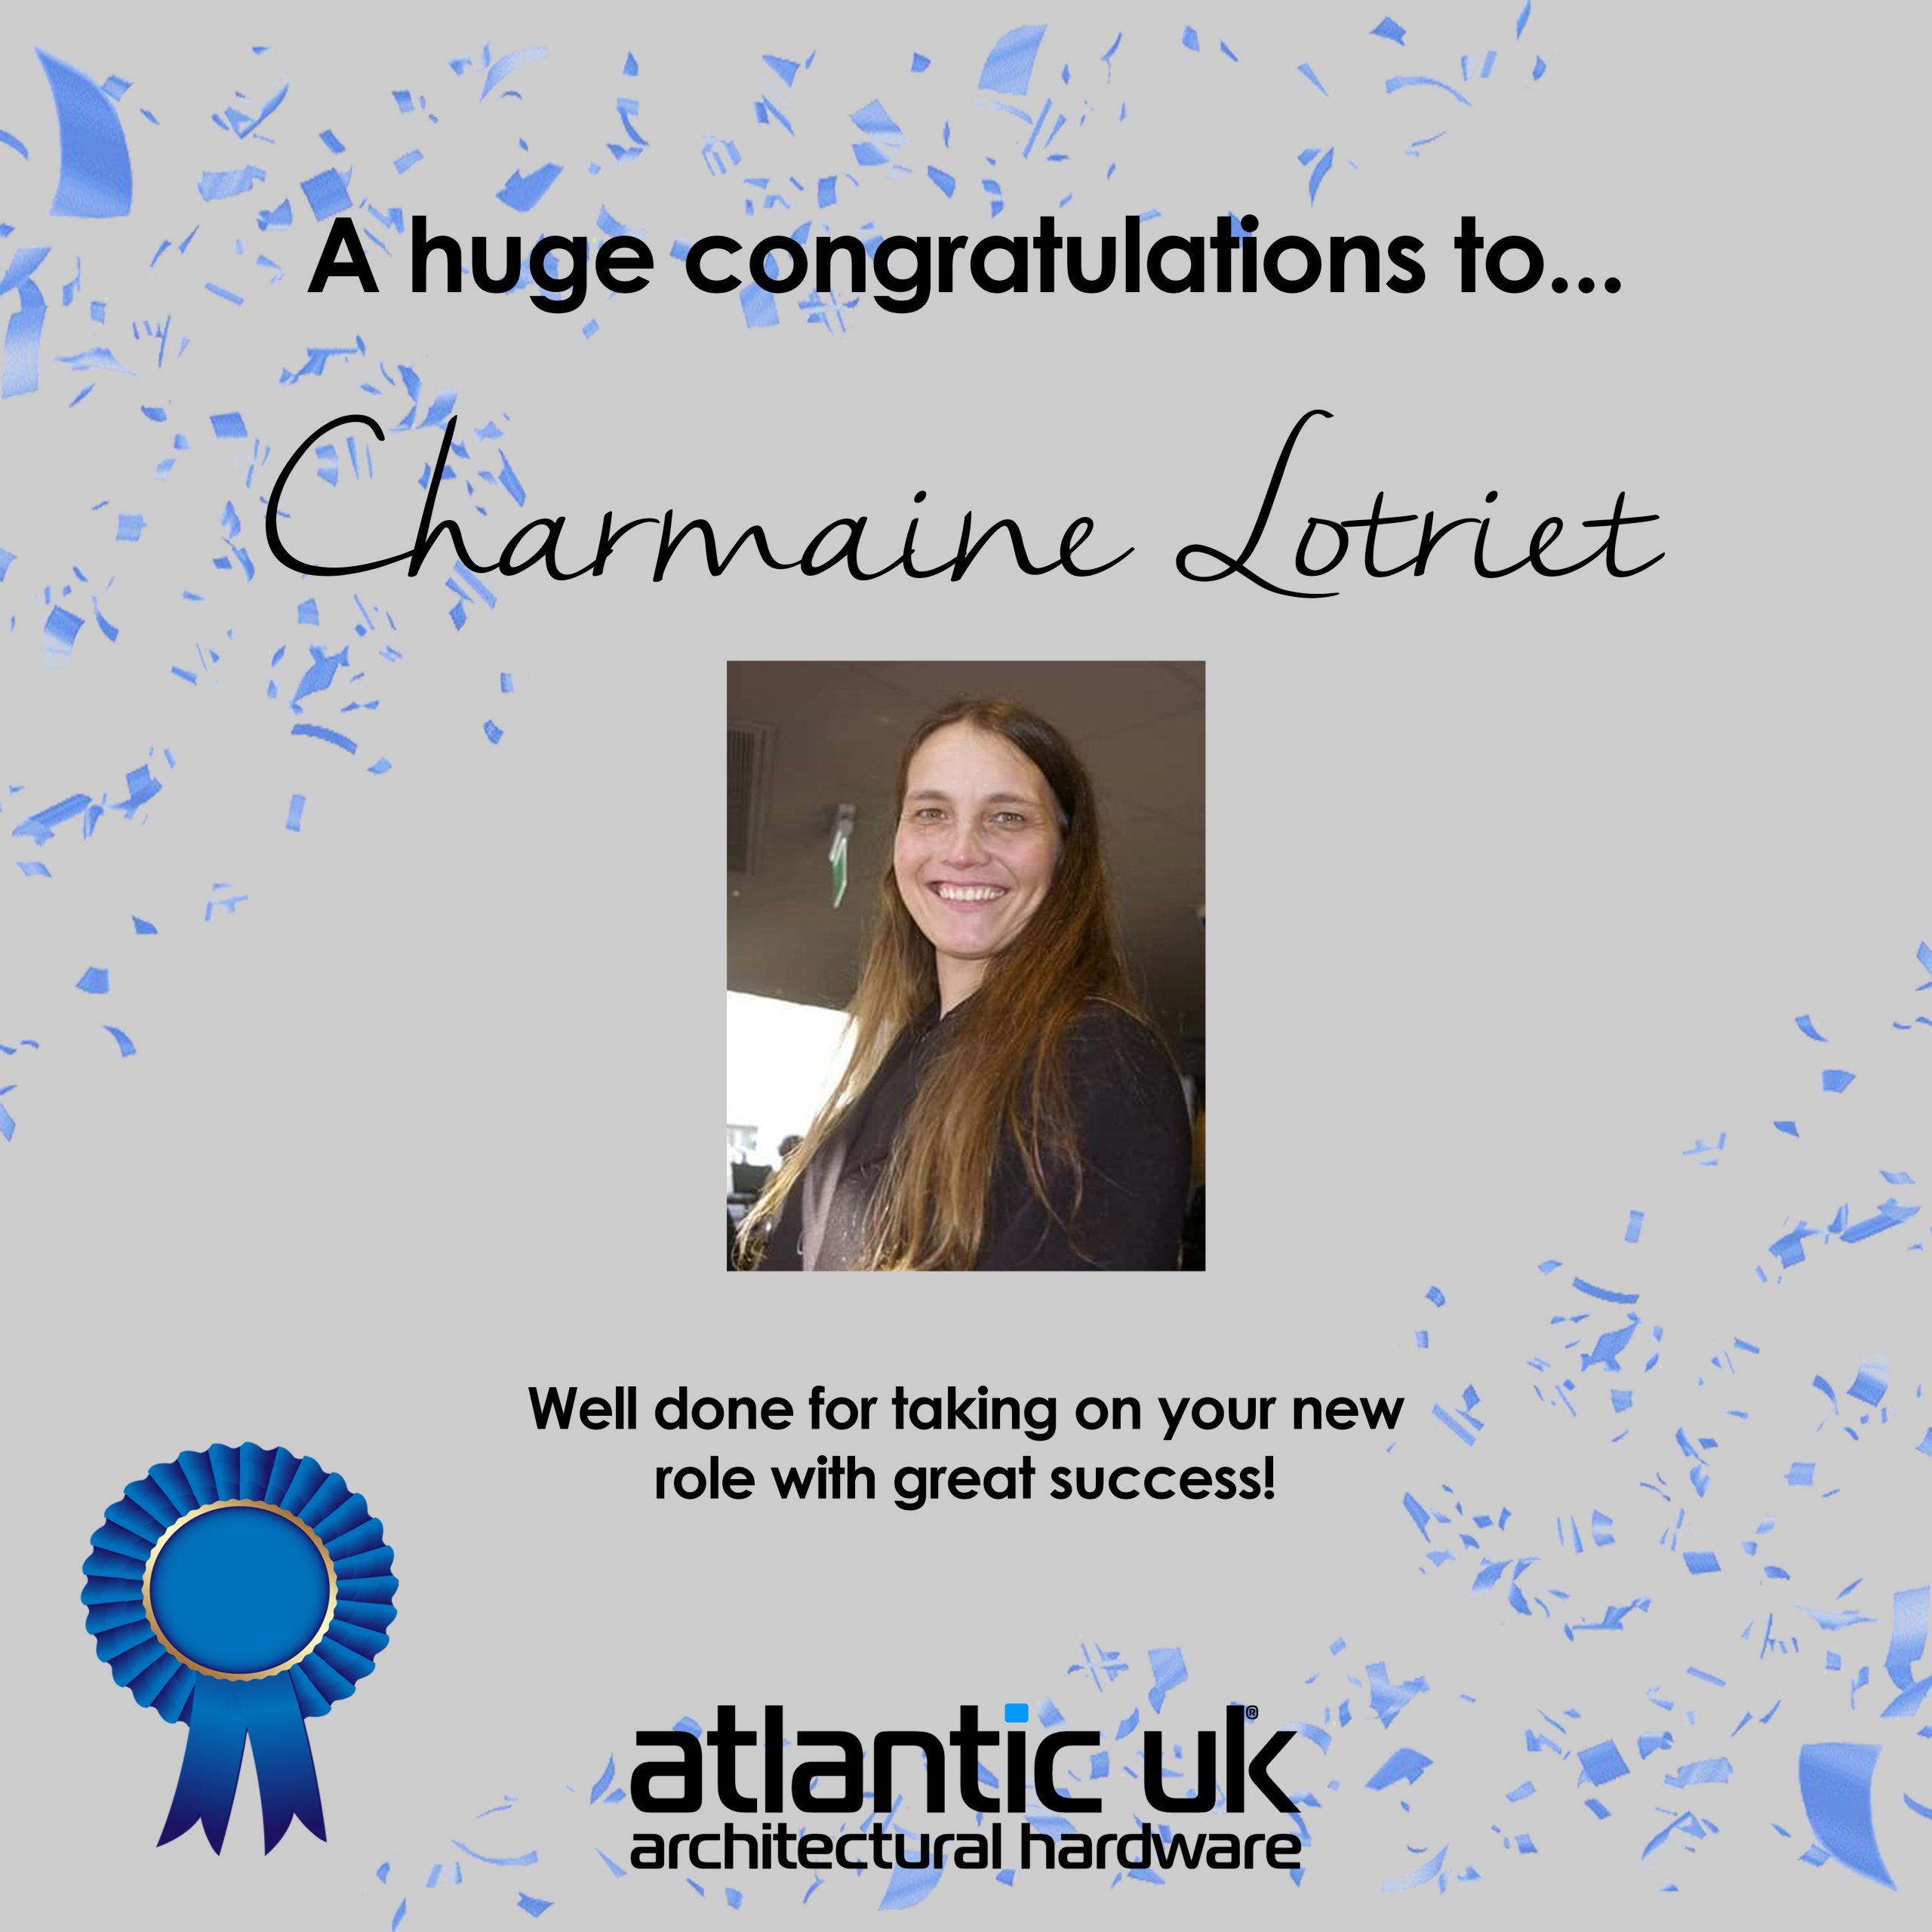 Congratulations Charmaine!  Employee of the Month for February! image